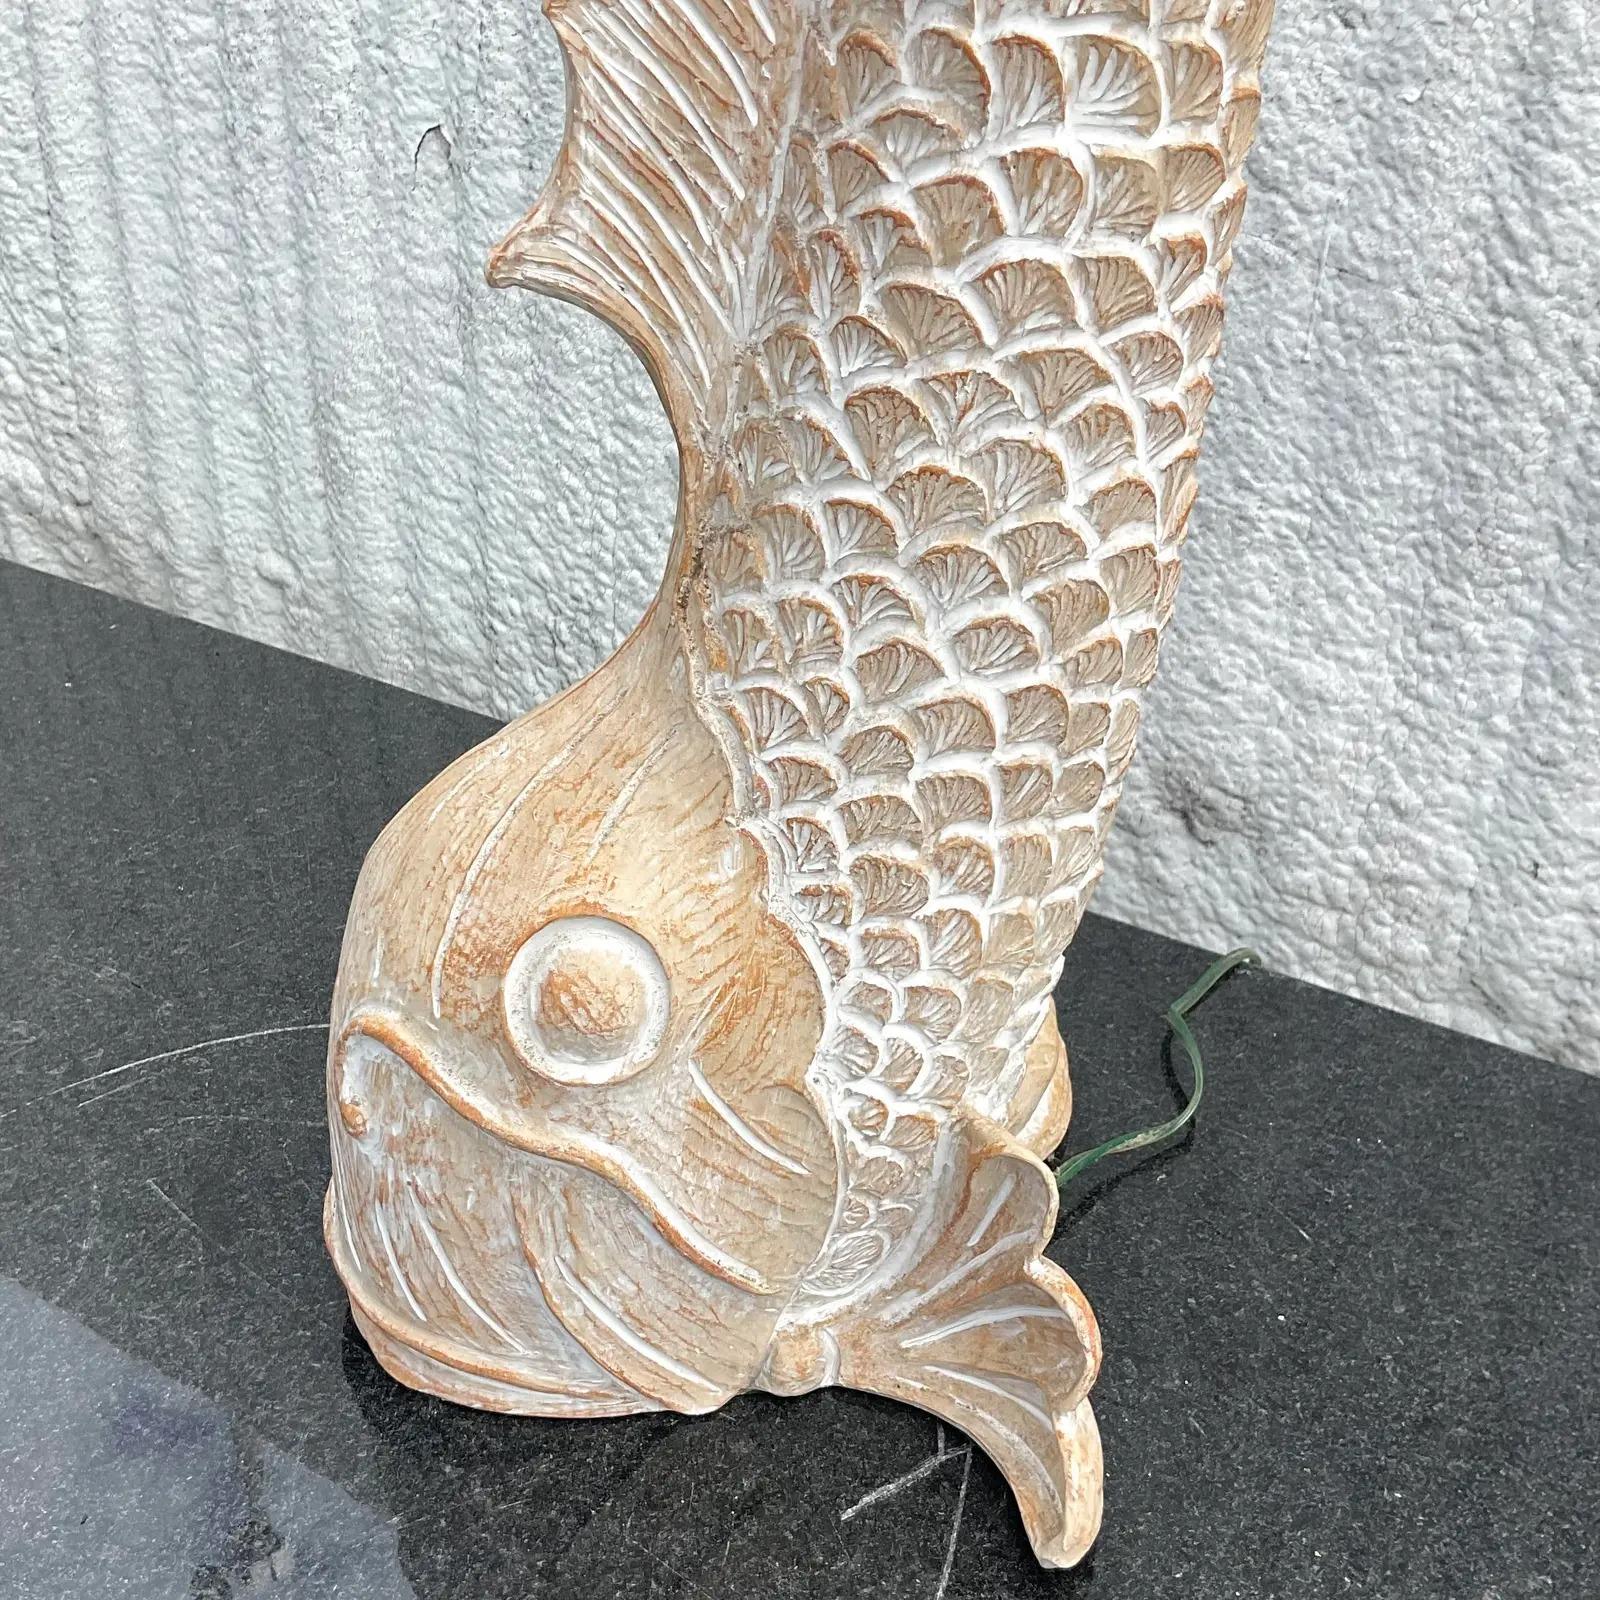 A fantastic vintage Coastal floor lamp. A beautiful hand carved Koi fish in a chic cerused finish. Acquired from a Palm Beach estate.